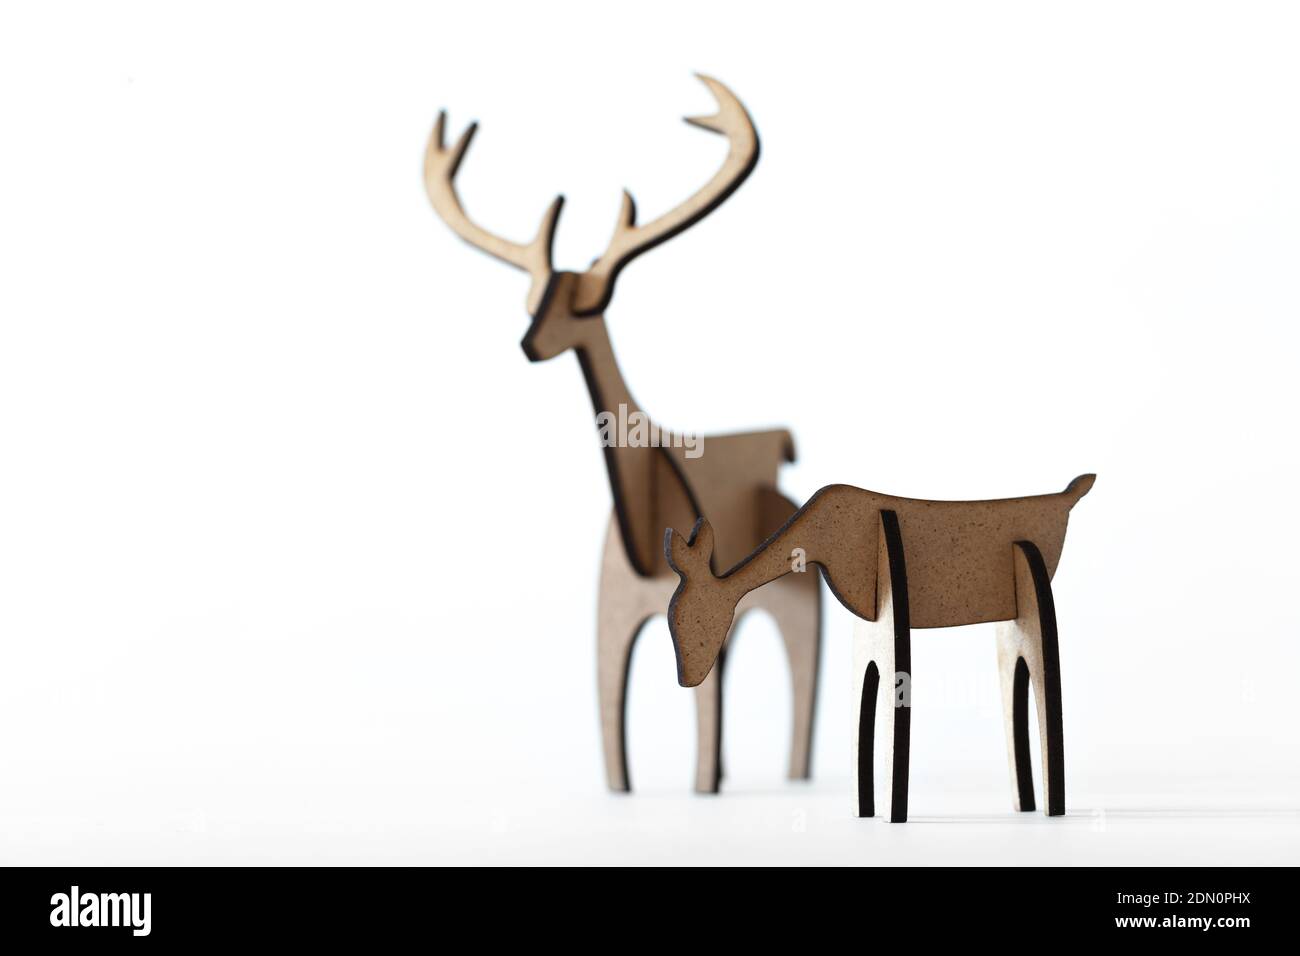 Reindeer stag and young deer cardboard toy isolated on a white background. Christmas icon and shapes with text space Stock Photo